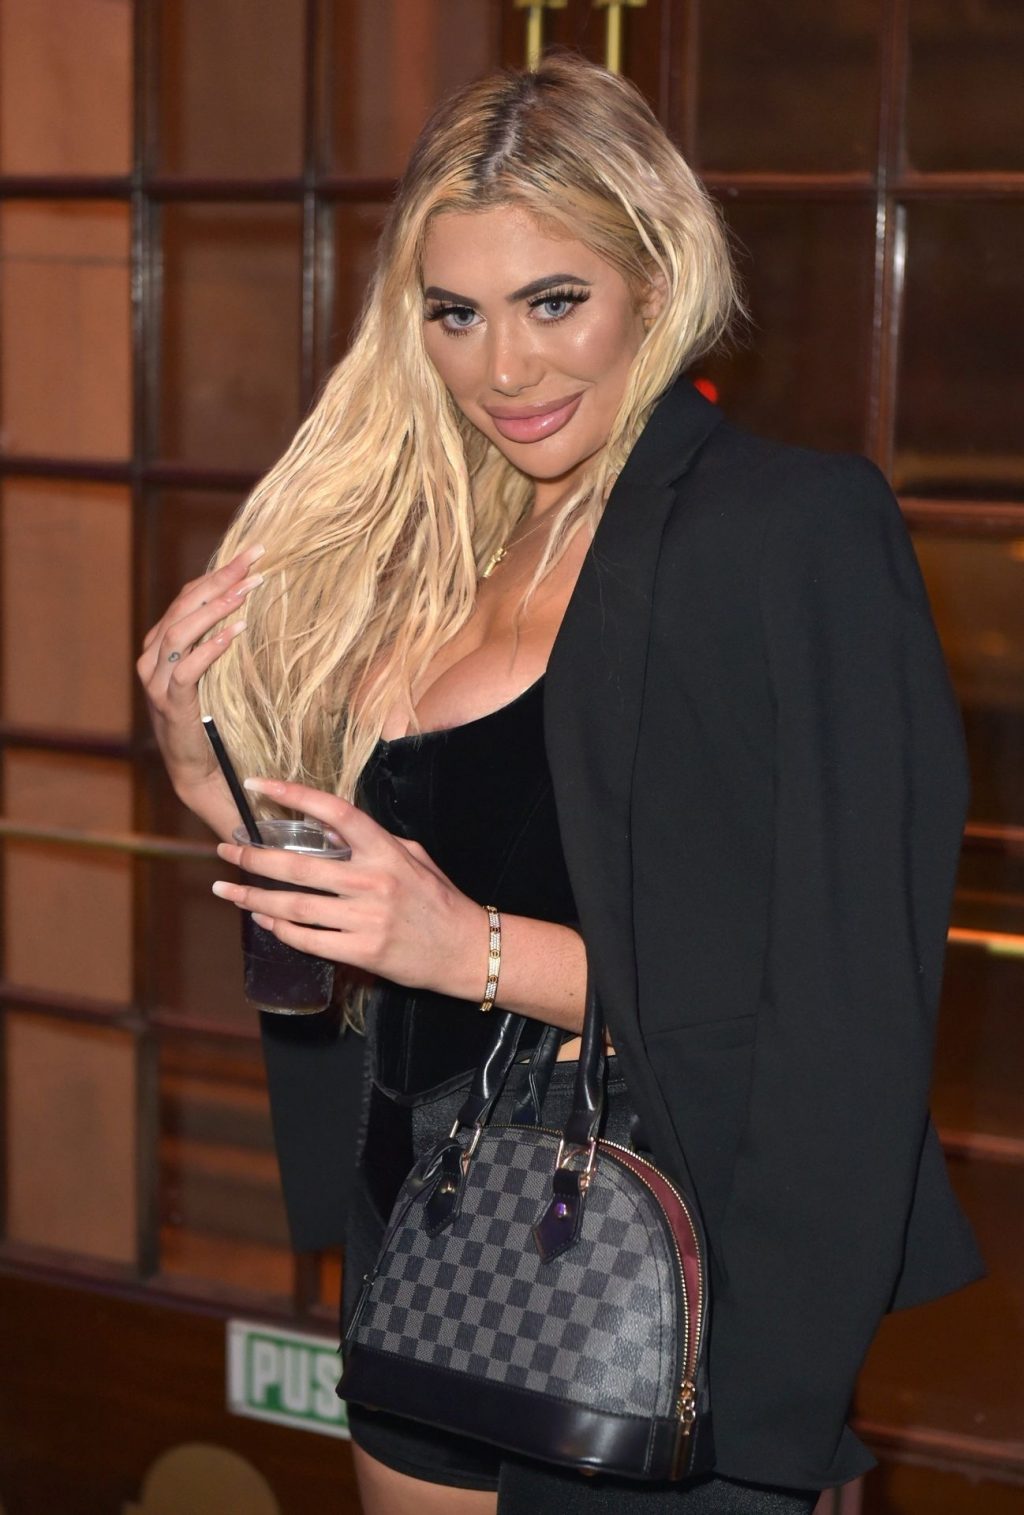 Chloe Ferry Hits the Town and Attends Floyd Mayweather Night (67 Photos)